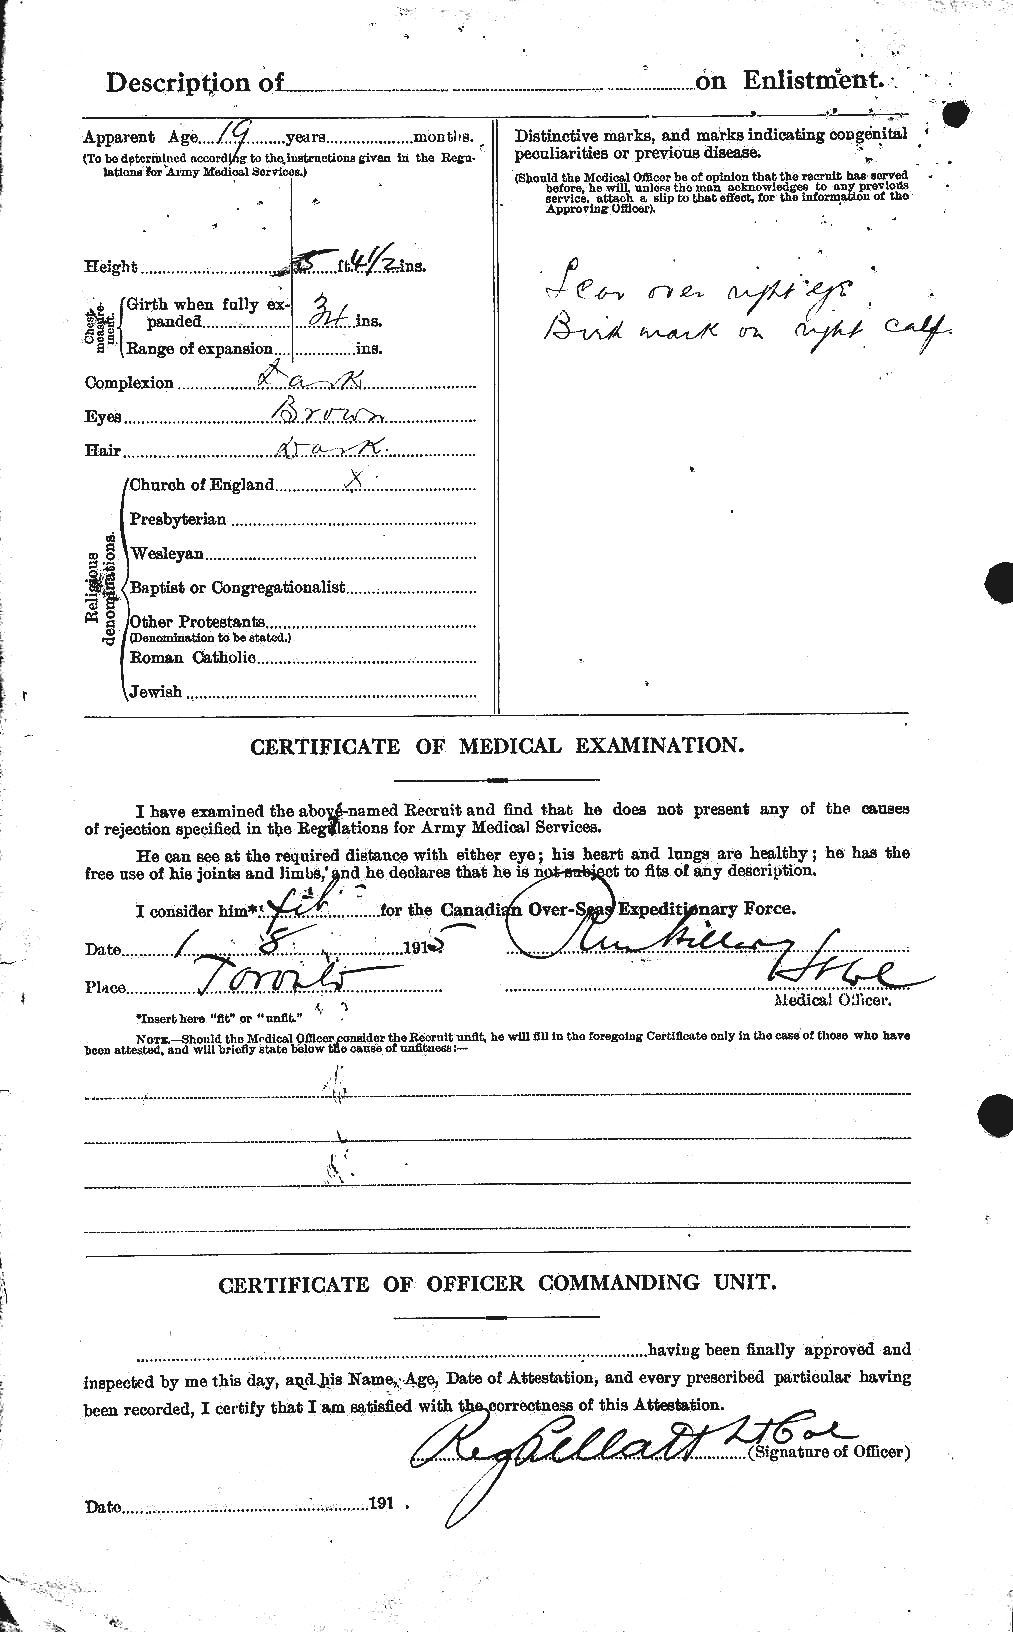 Personnel Records of the First World War - CEF 657647b